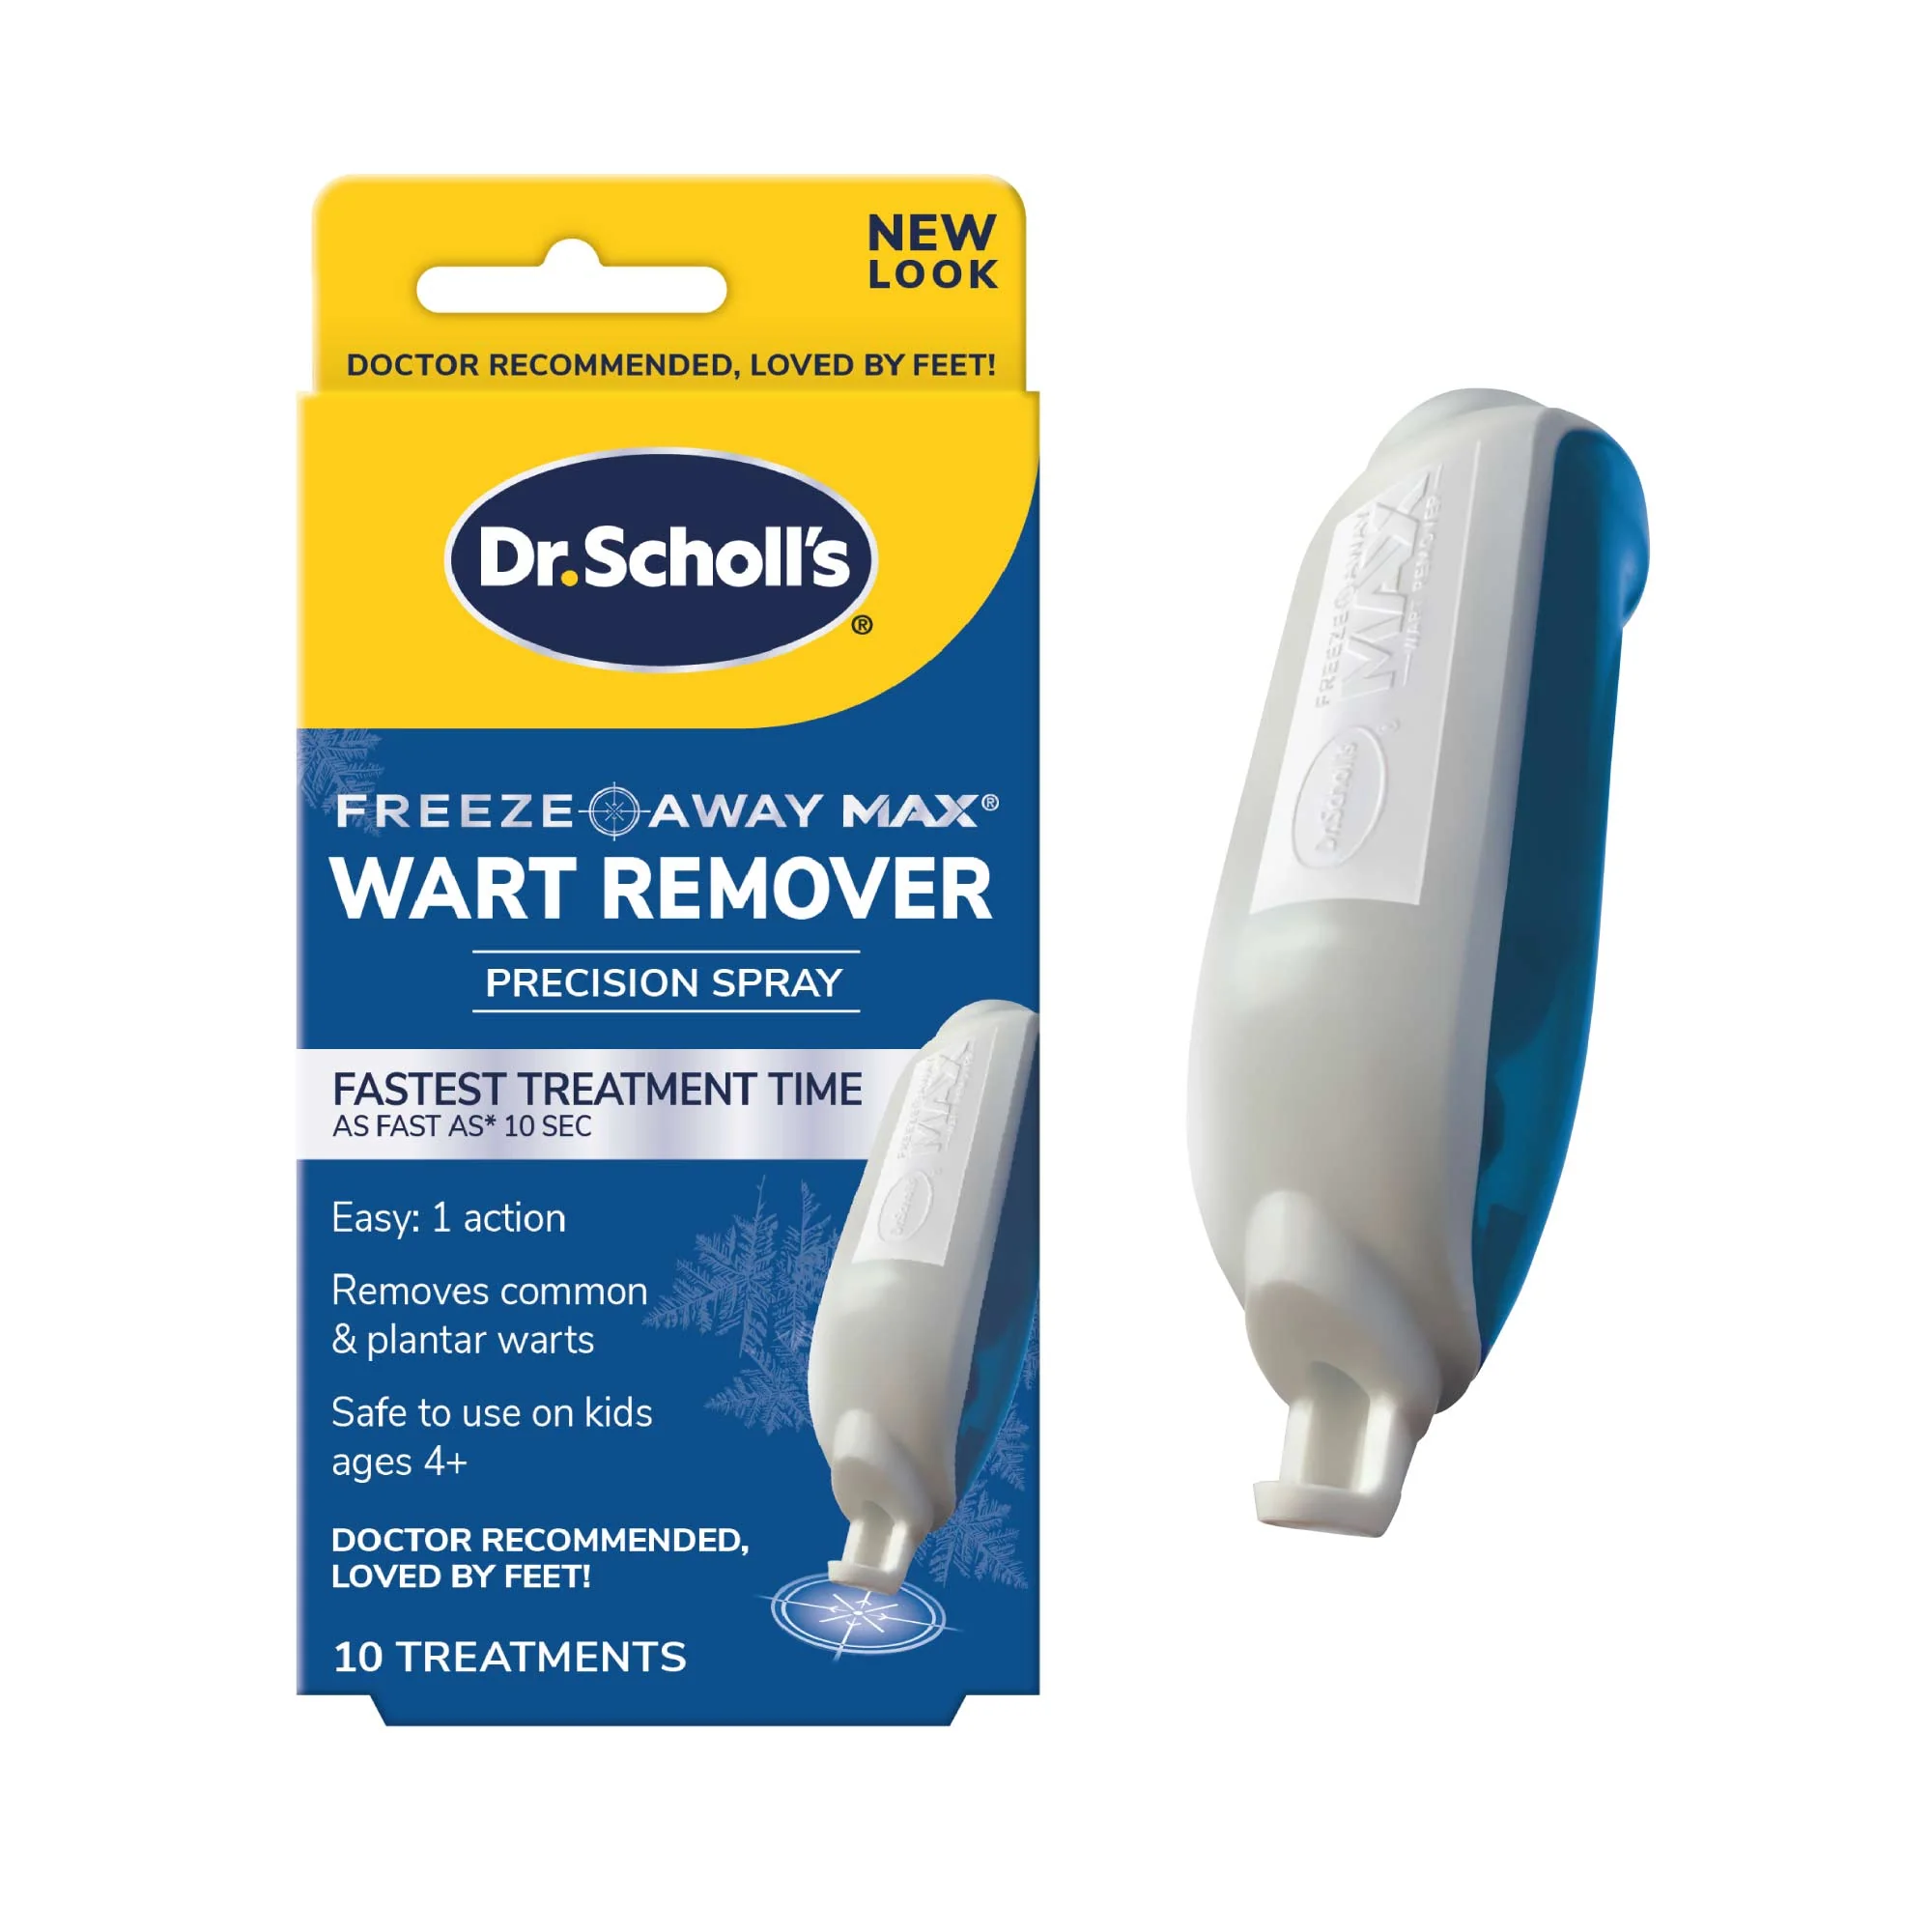 The Dr Scholl's Wart Remover The Best Listicle: A Guide to Clear Skin